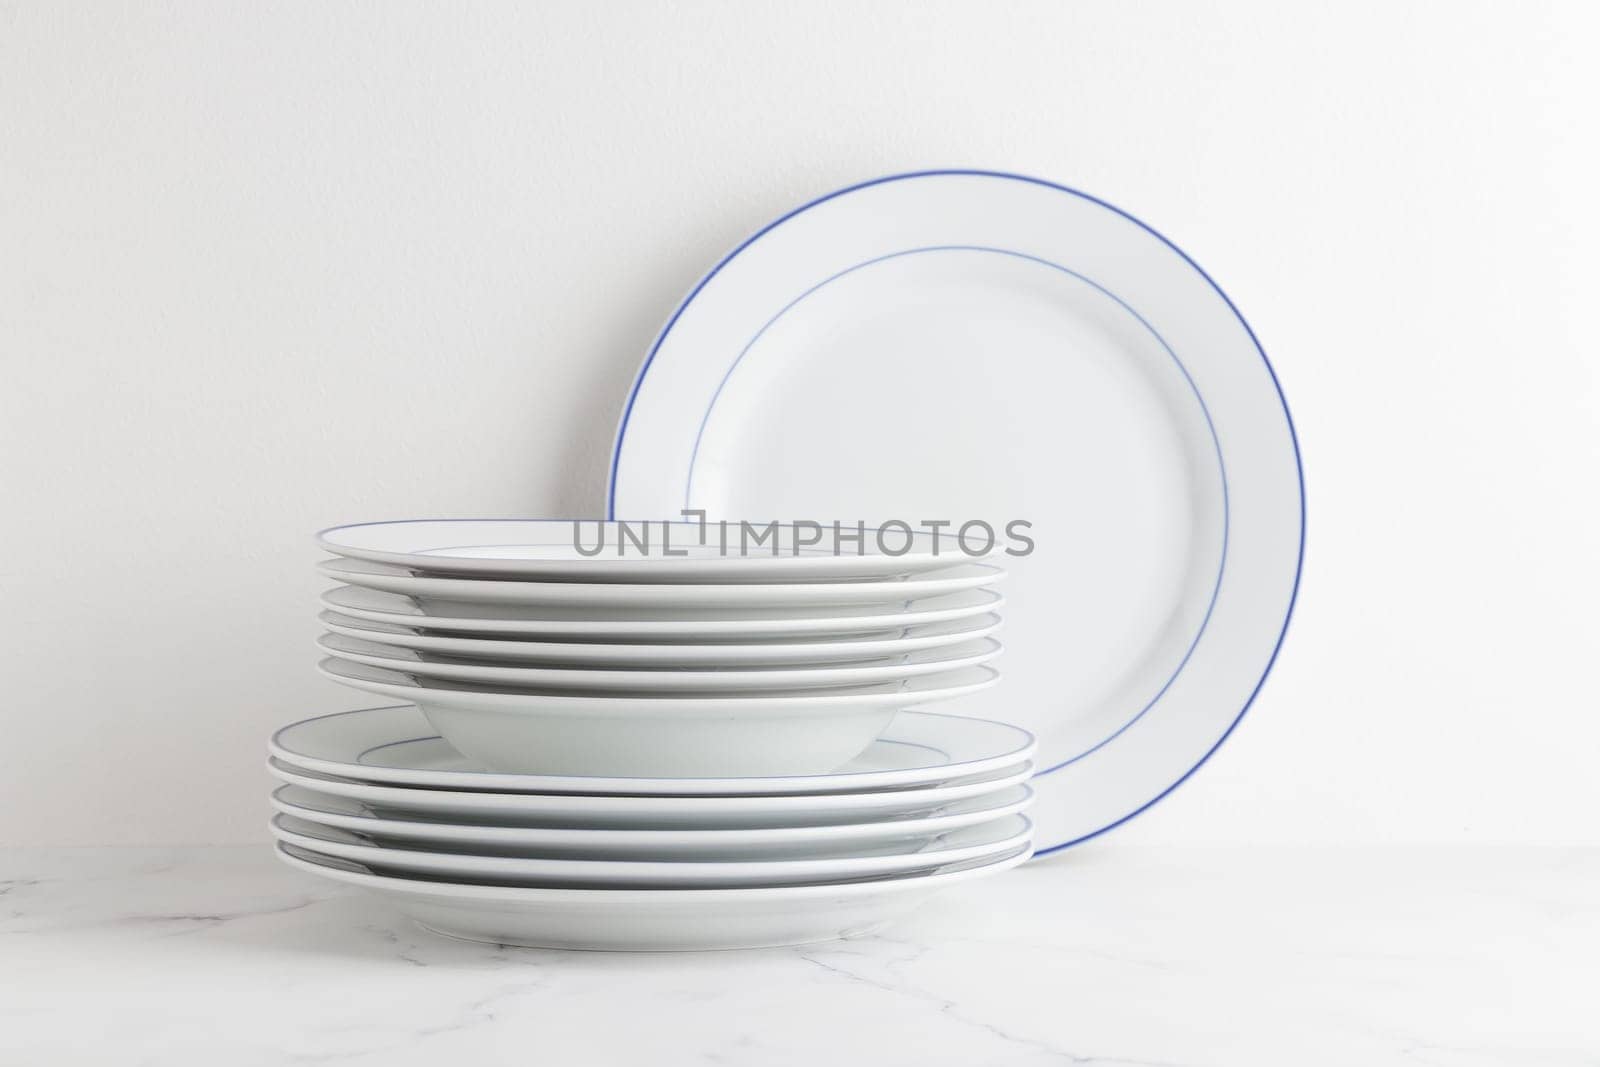 Clean white dinner set of plates on a white background